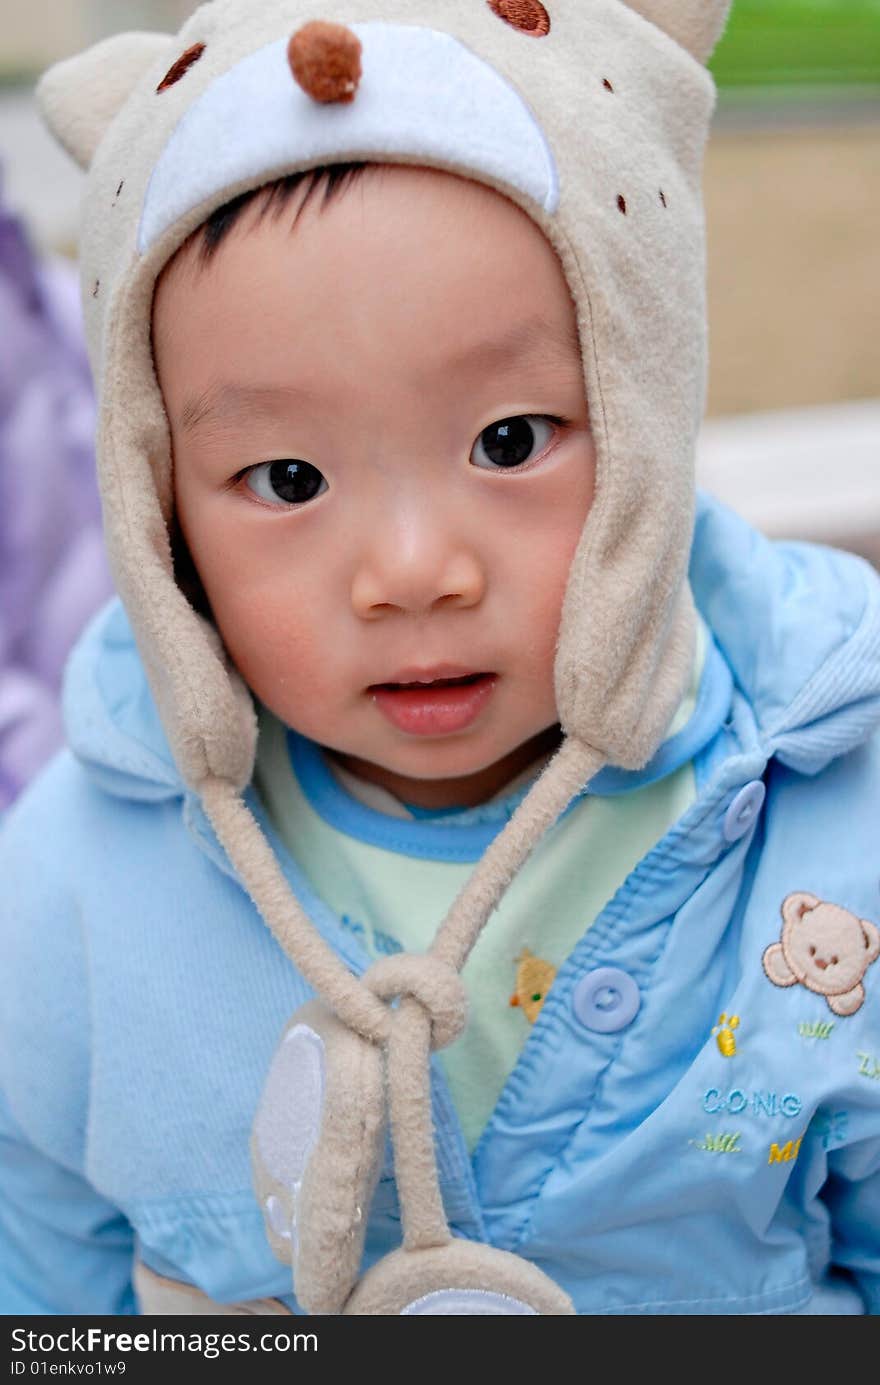 Bright picture of adorable chinese baby boy. Bright picture of adorable chinese baby boy